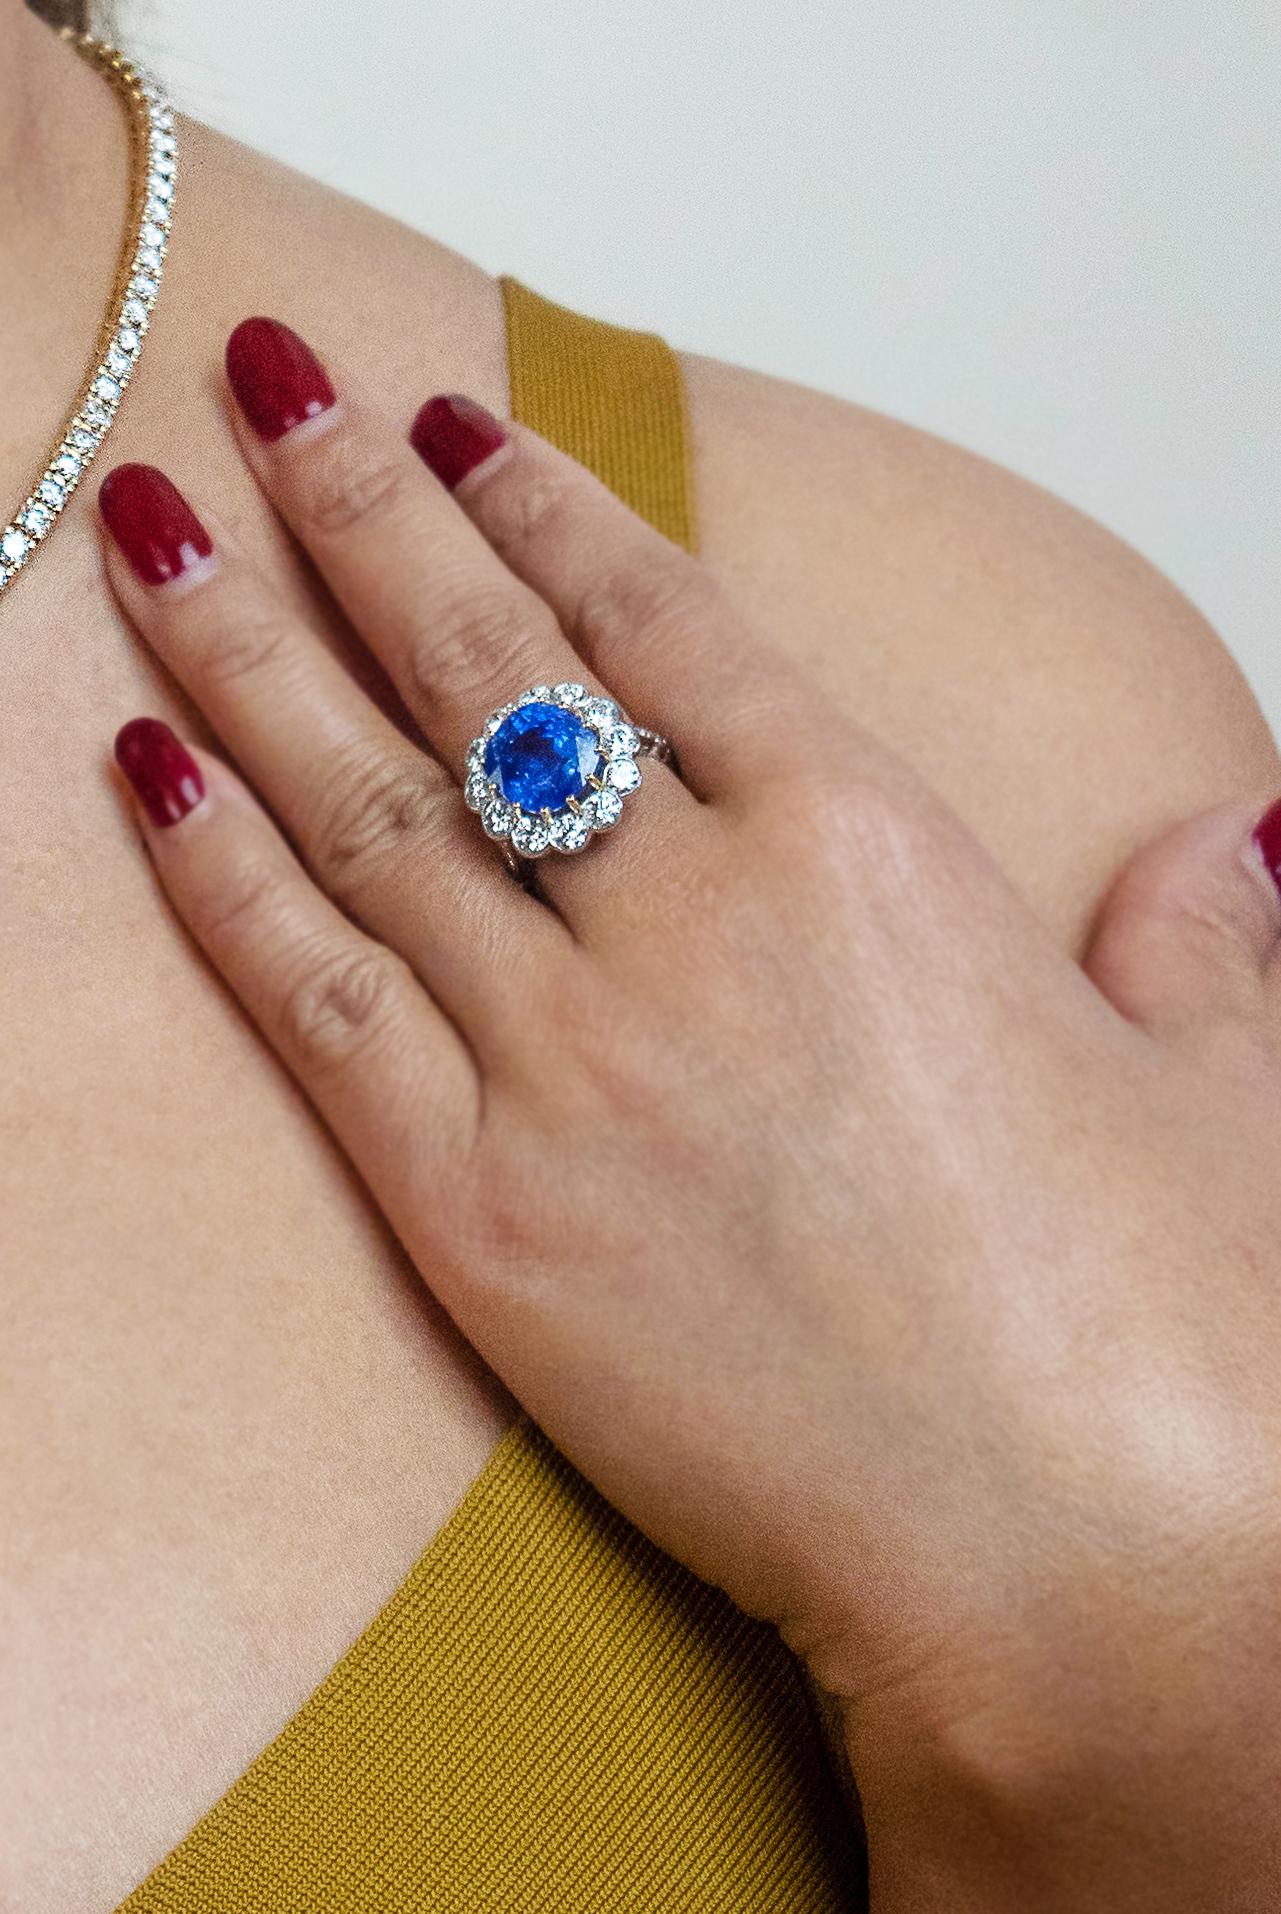 Certified natural untreated sapphire 9.22 ct and diamond ring set in platinum and yellow gold claws to complement the sapphire. 
The exquisite sapphire hue of blue perfectly complements shining diamonds. Cushion cut sapphire 9.22 carats with a